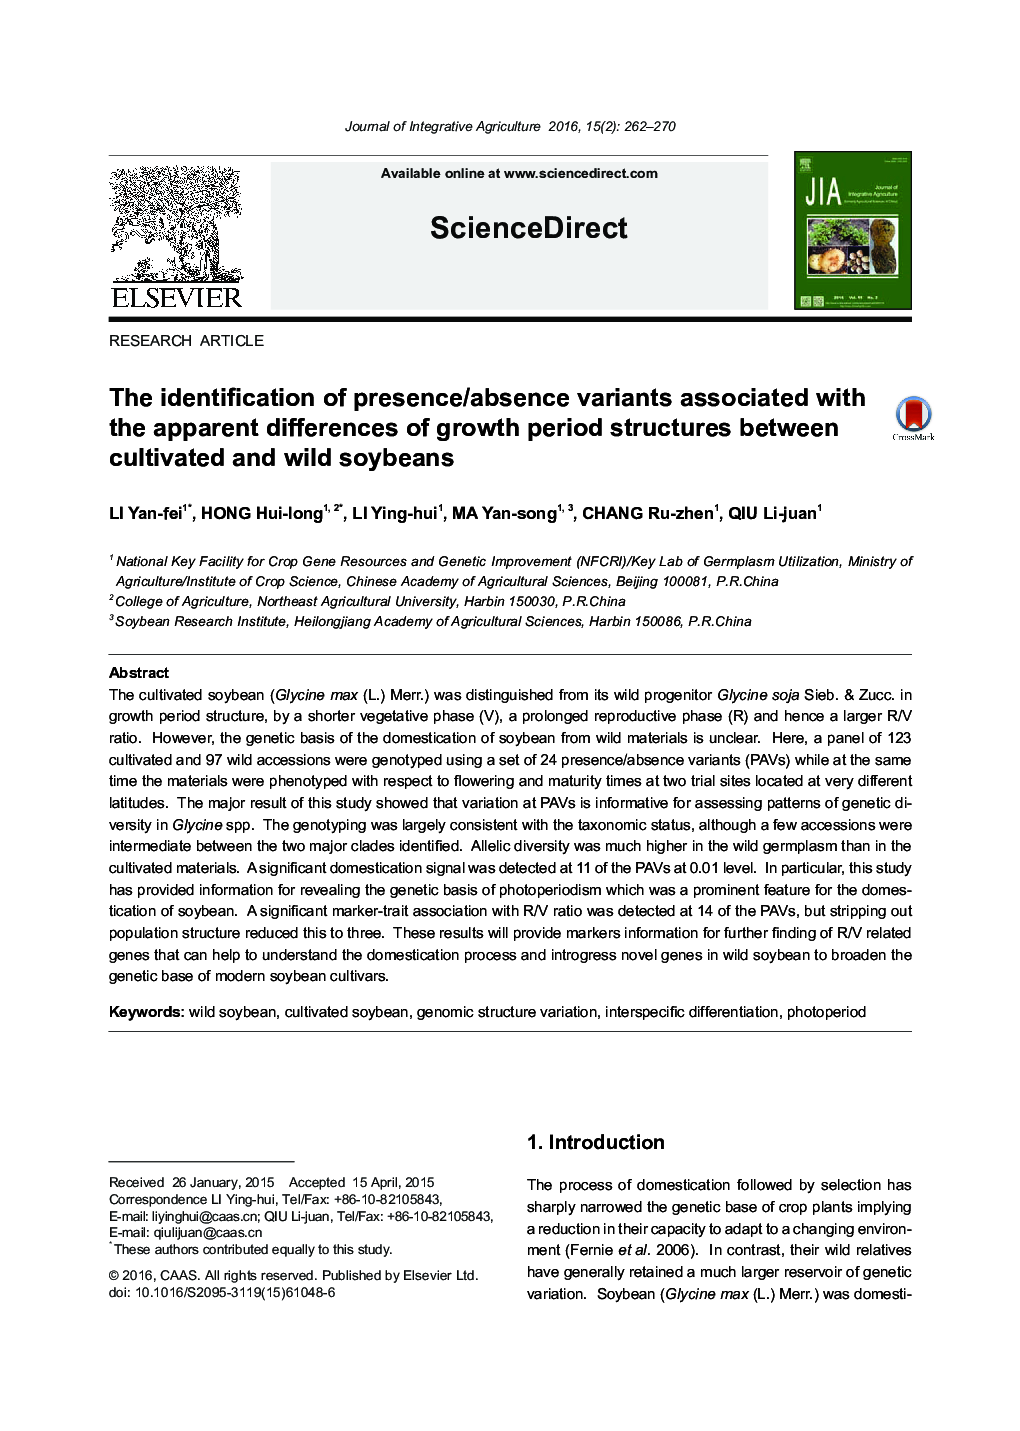 The identification of presence/absence variants associated with the apparent differences of growth period structures between cultivated and wild soybeans